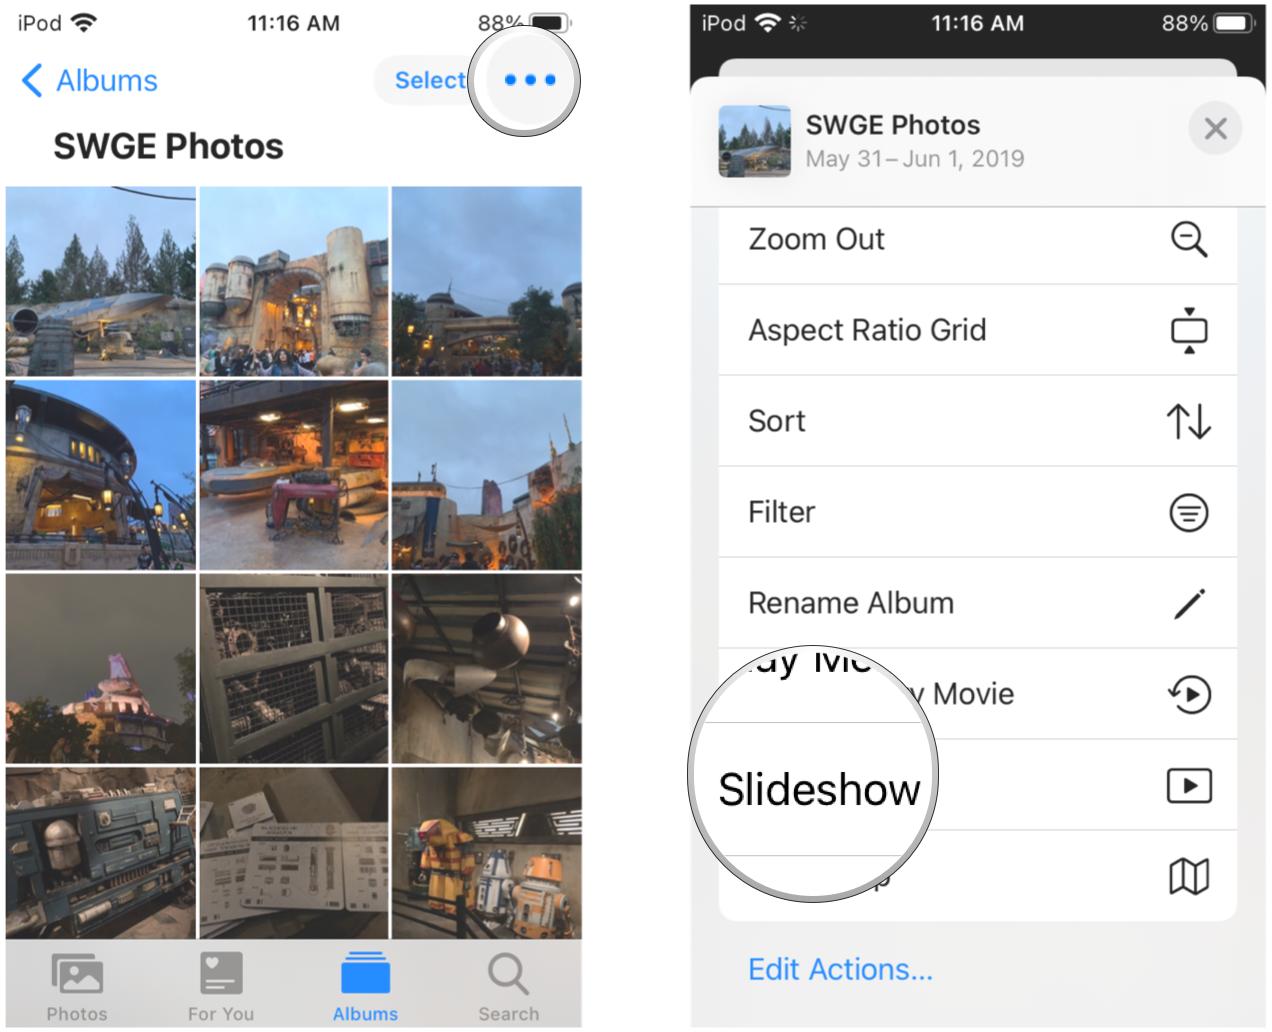 Start a slideshow with an entire album in Photos in iOS 14 on your iPhone or iPad by showing steps: Tap the ... button, select Slideshow from the menu